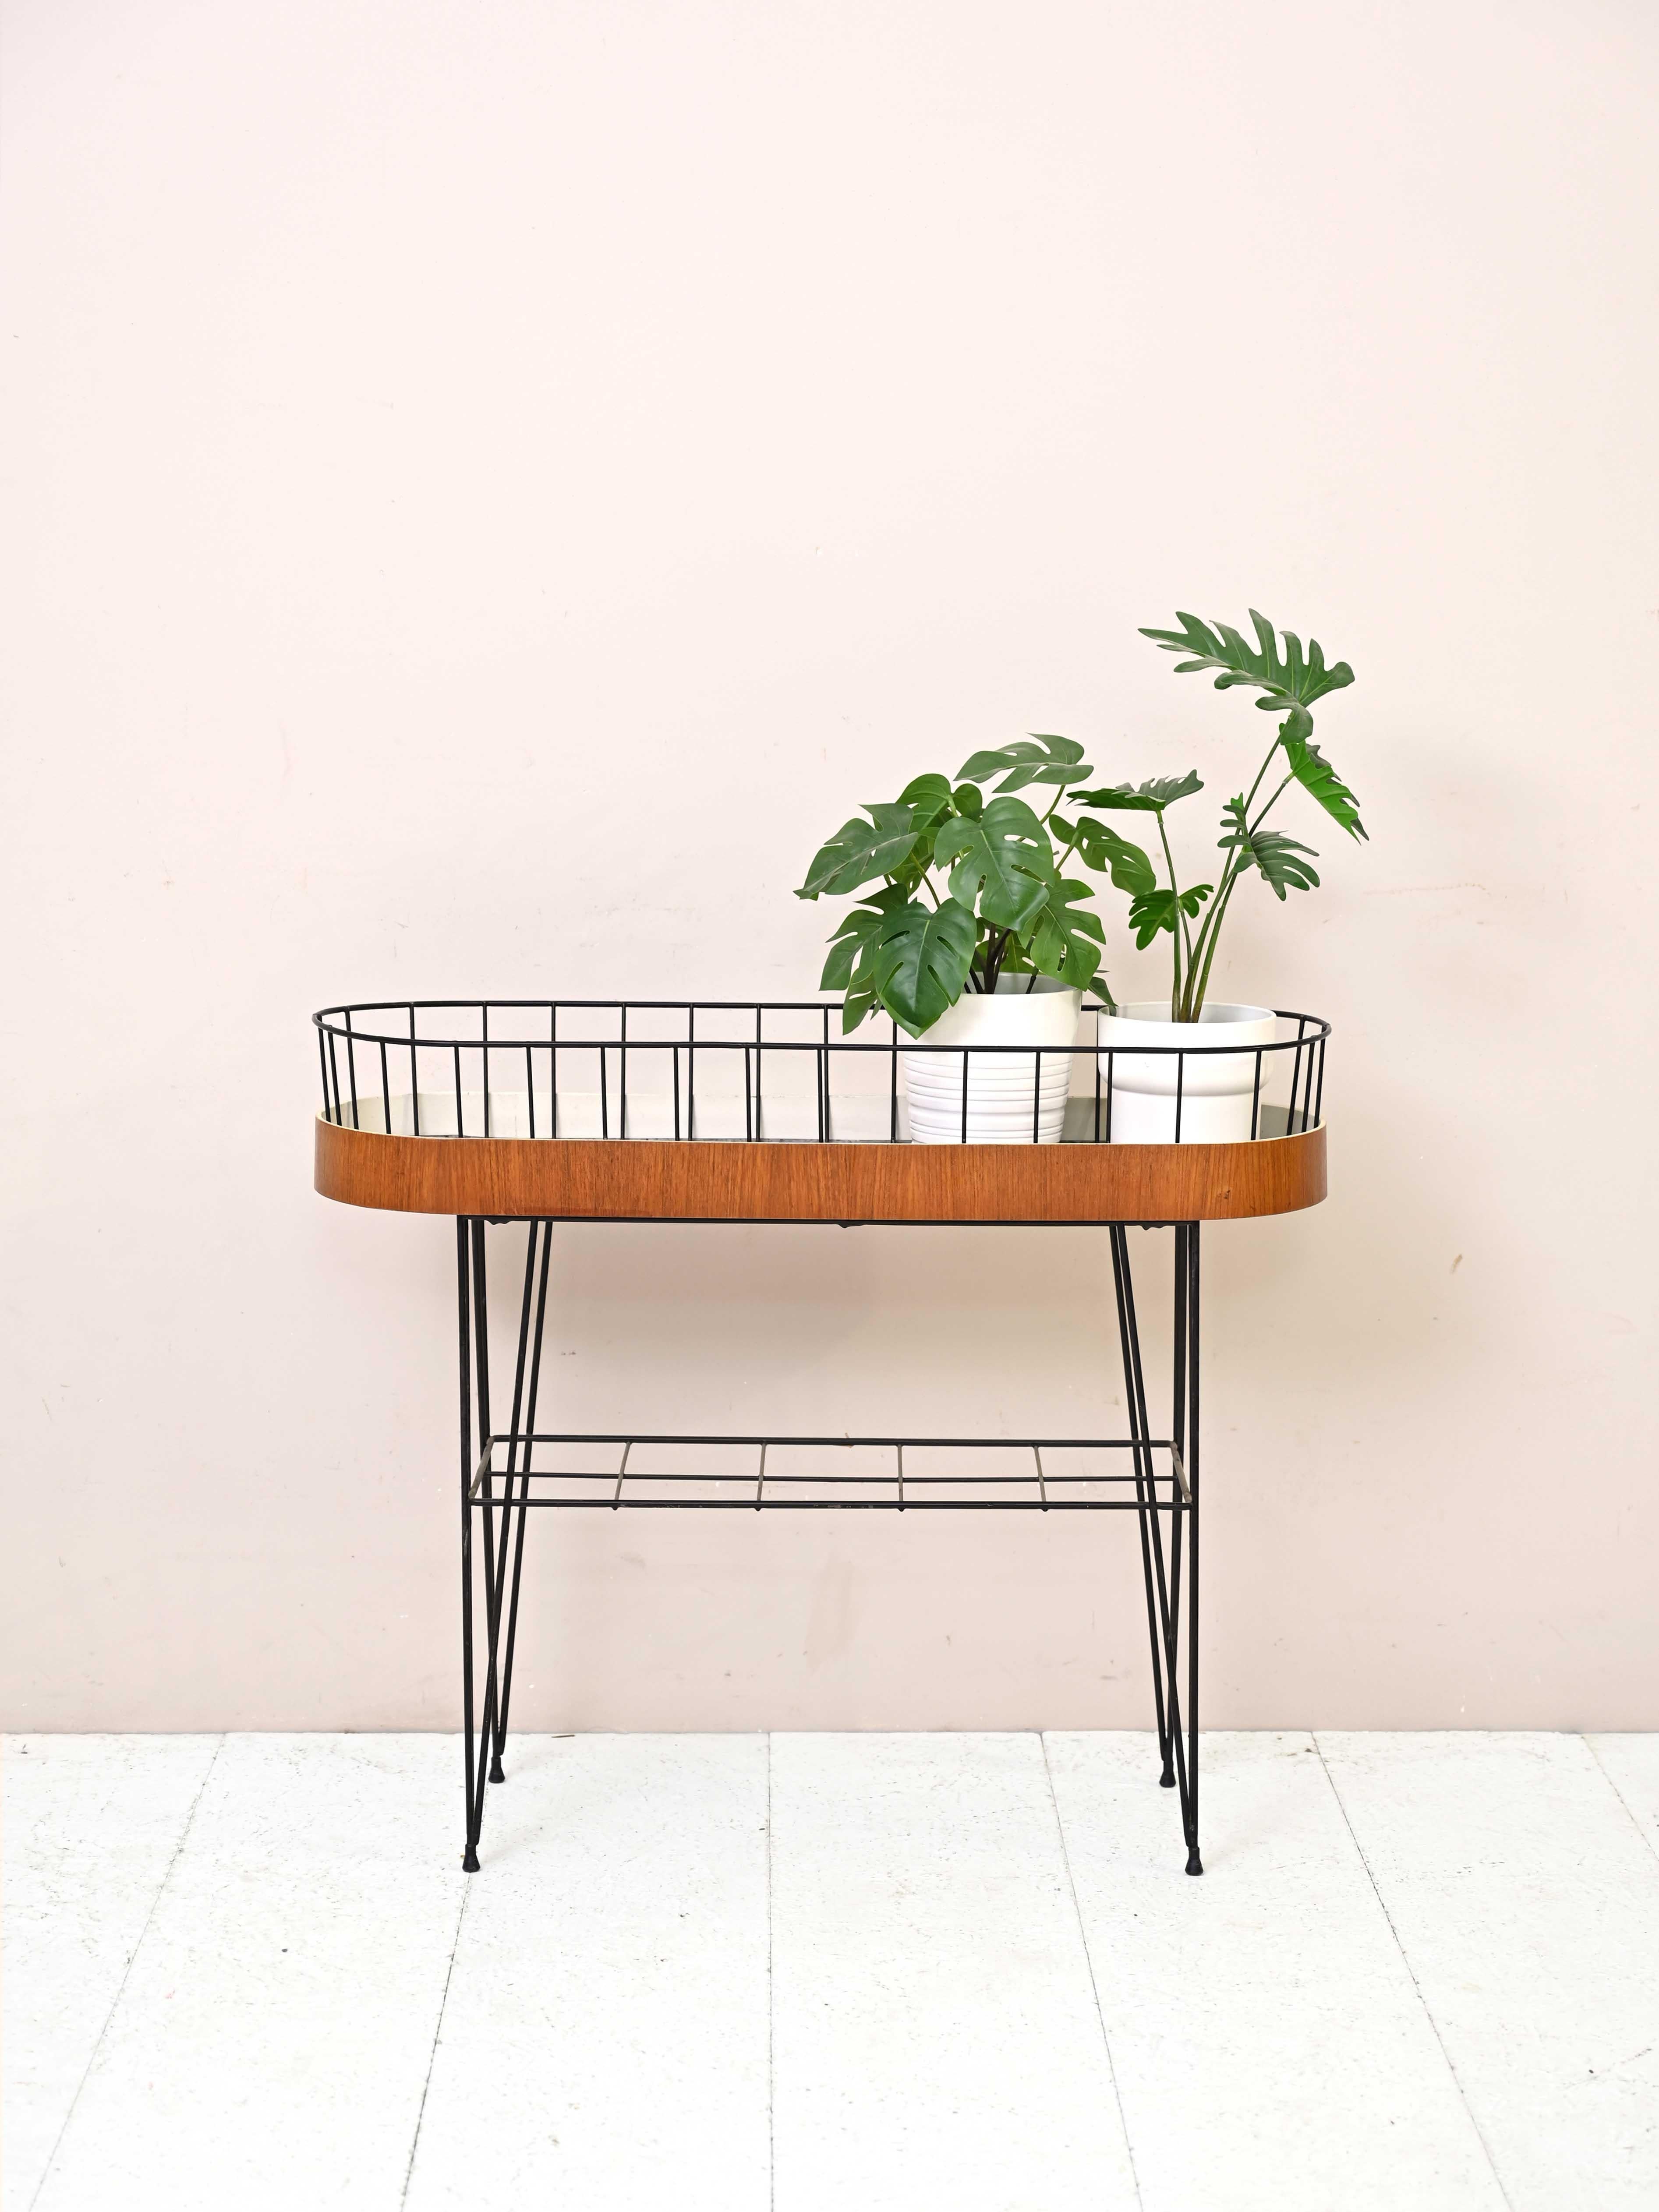 Vintage Scandinavian 1960s flower Stand.
 
Peculiar piece of furniture consisting of a metal base and curved teak wood planter border.
Ideal to keep in the house placed under the window or on the porch, it will make the environment unique and